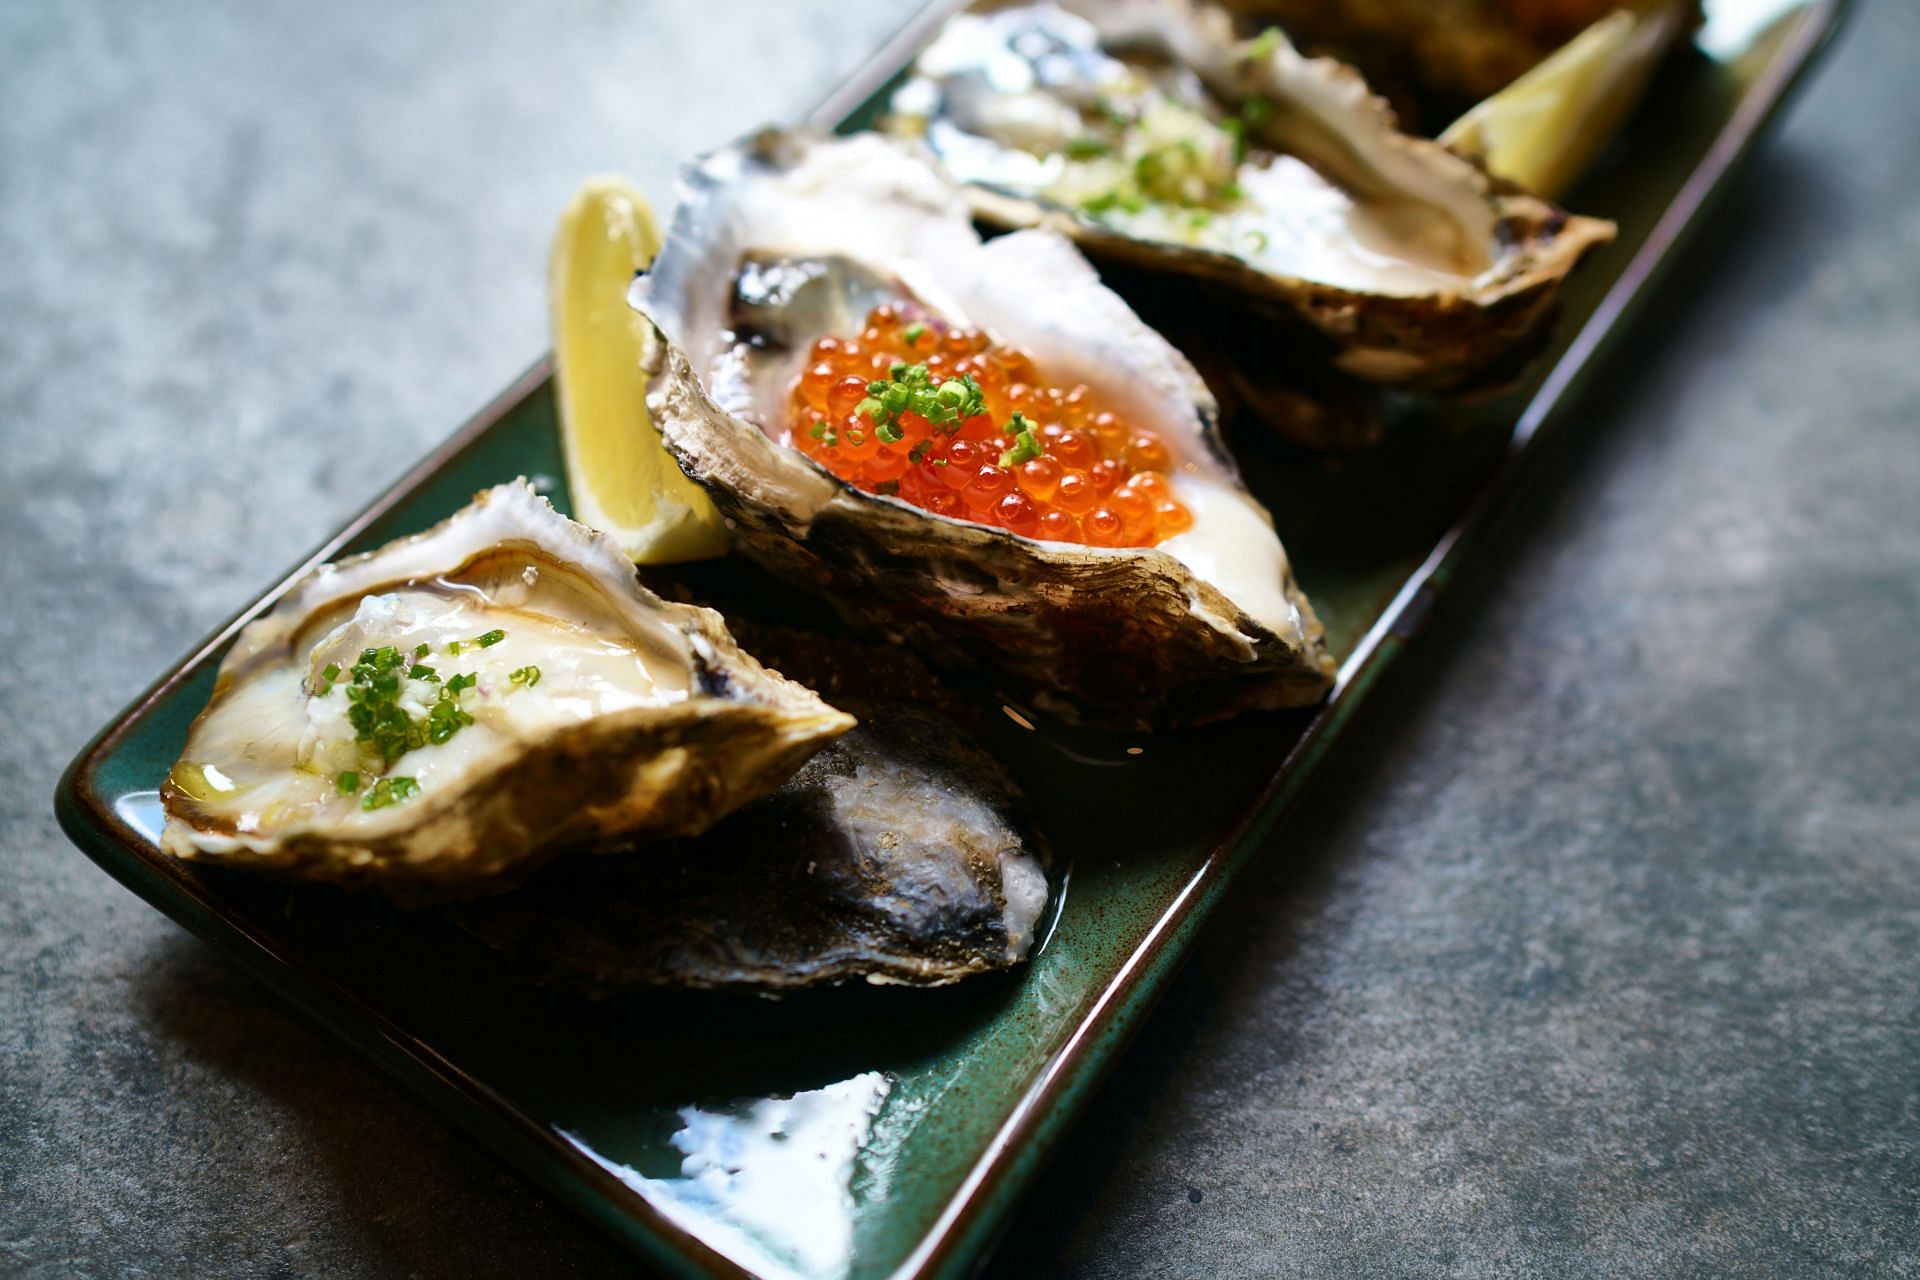 FDA warns for Connecticut harvested raw oysters amid potential contamination. (Image via Unsplash/ Bruce Chapman)